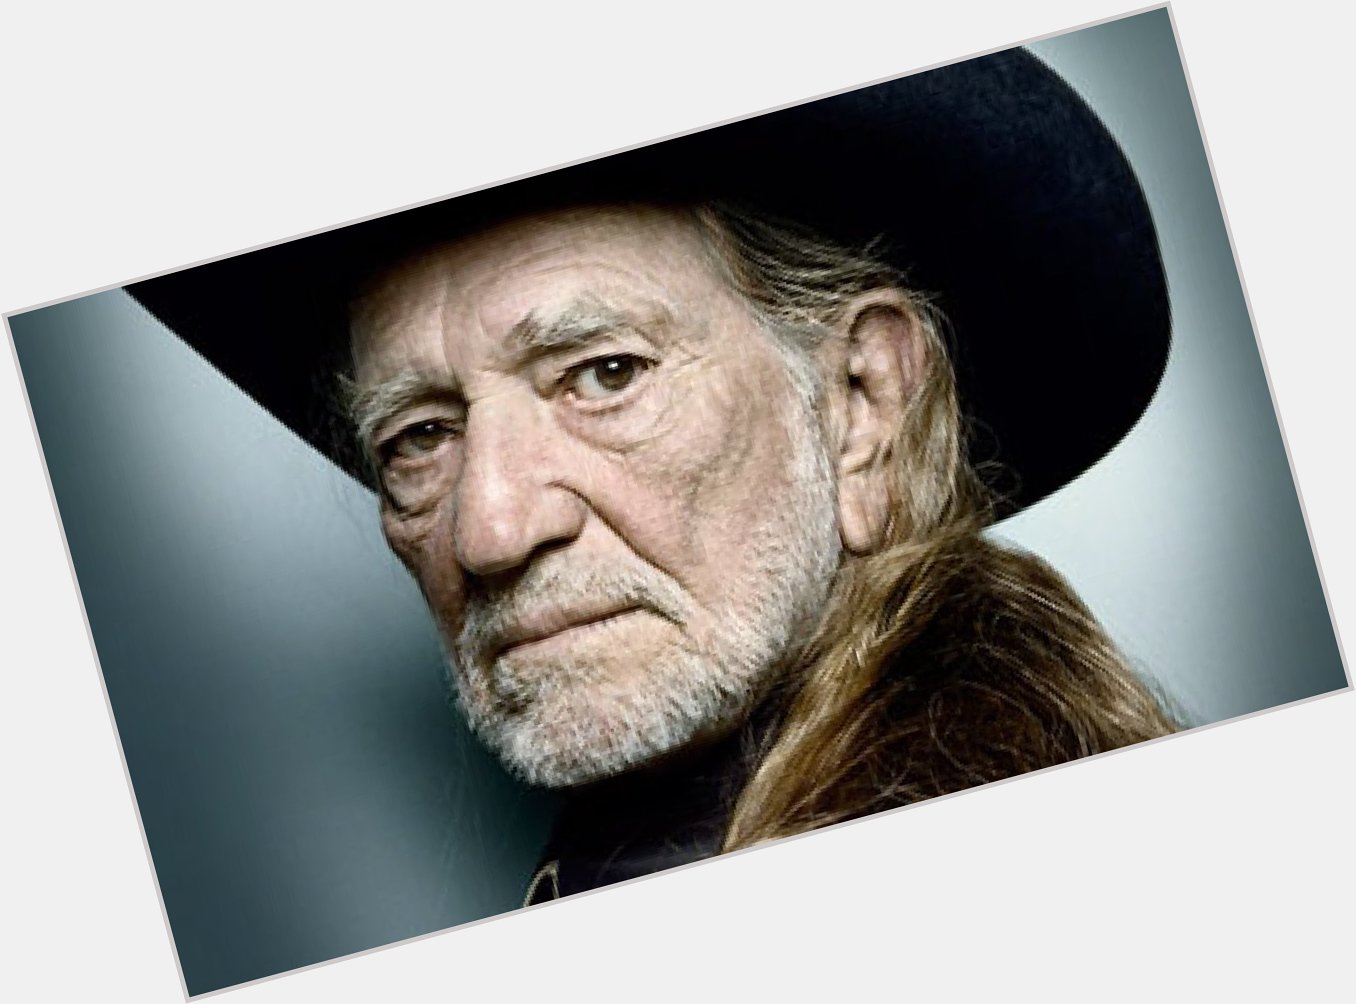 Happy 84th to country legend Willie Nelson  